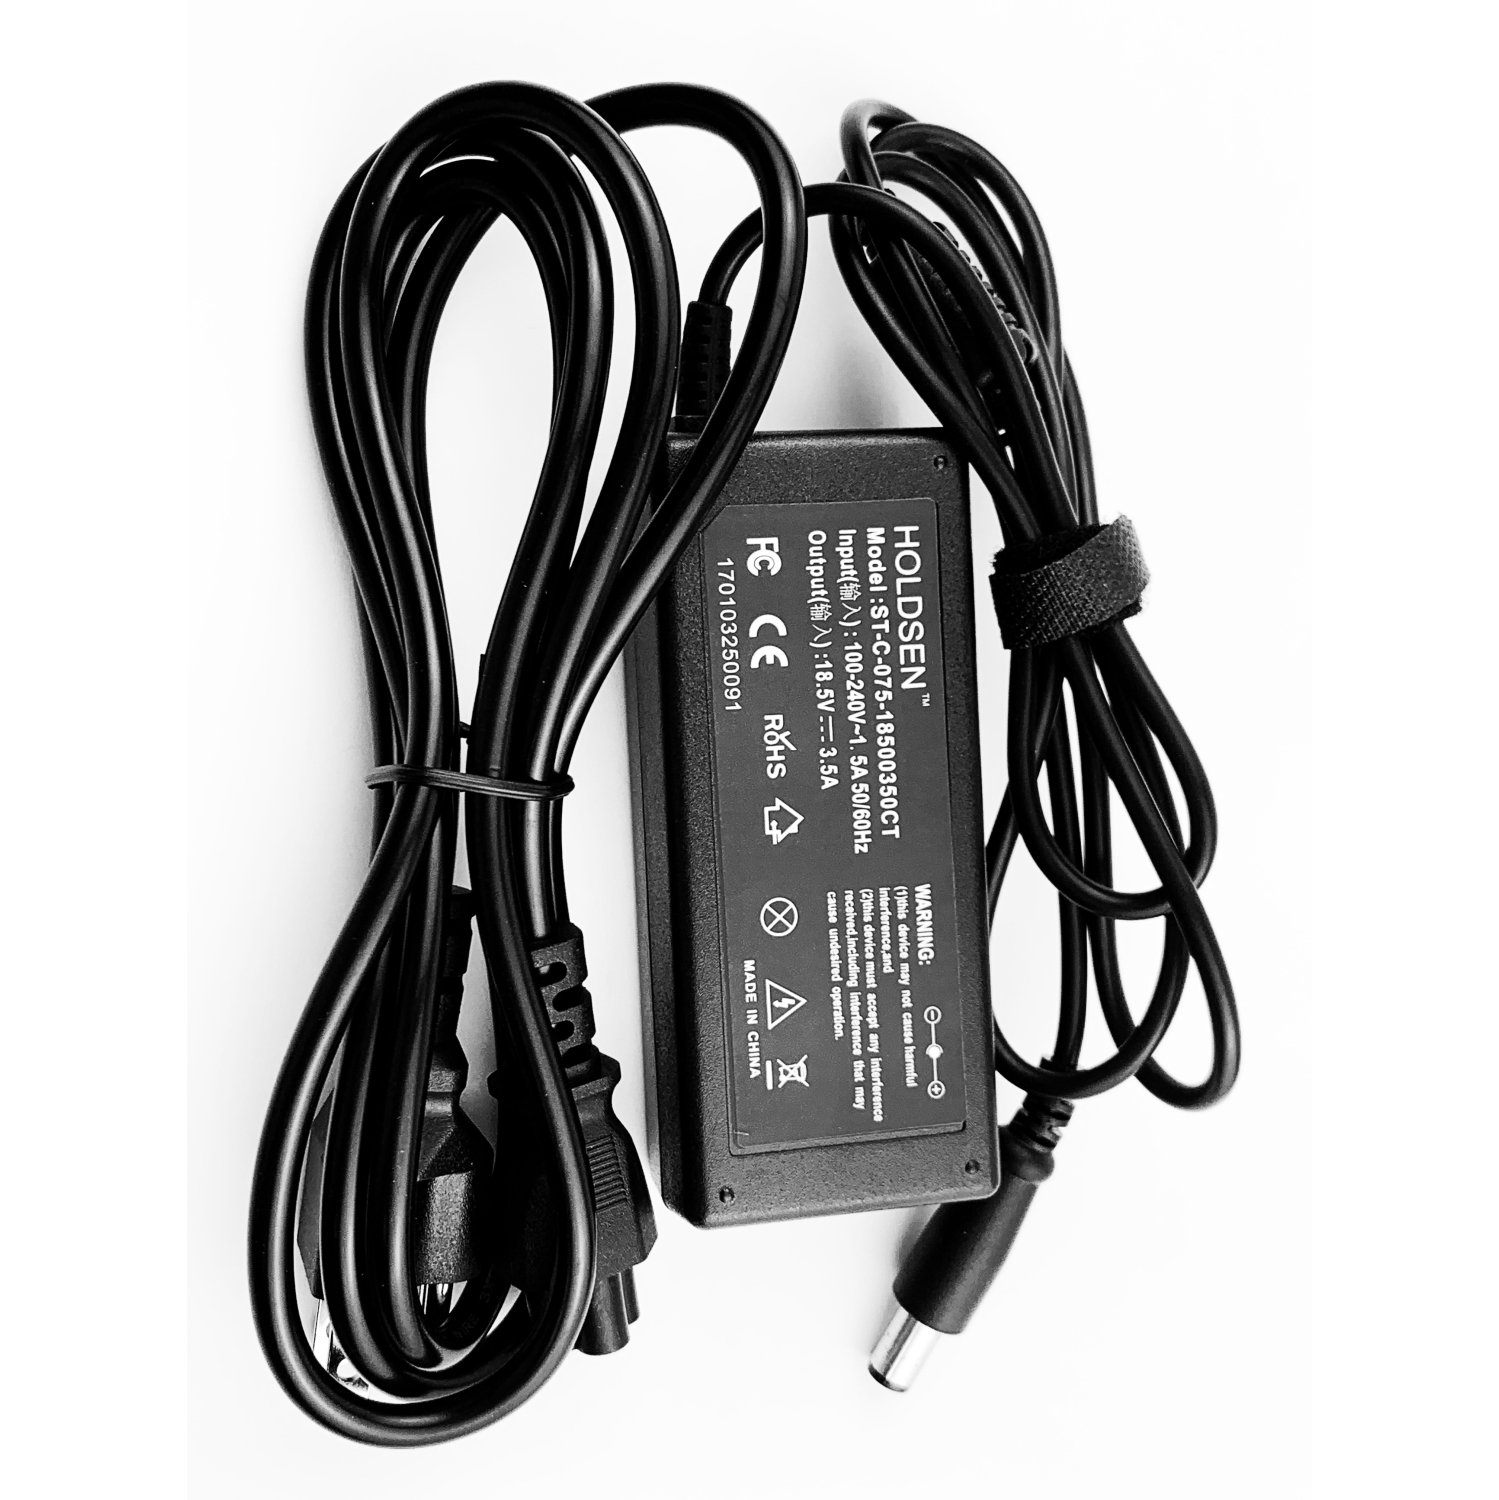 3.5A 65W AC adapter charger for HP Pavilion G4 G5 G6 G7 Elitebook Folio 9470M 9480M